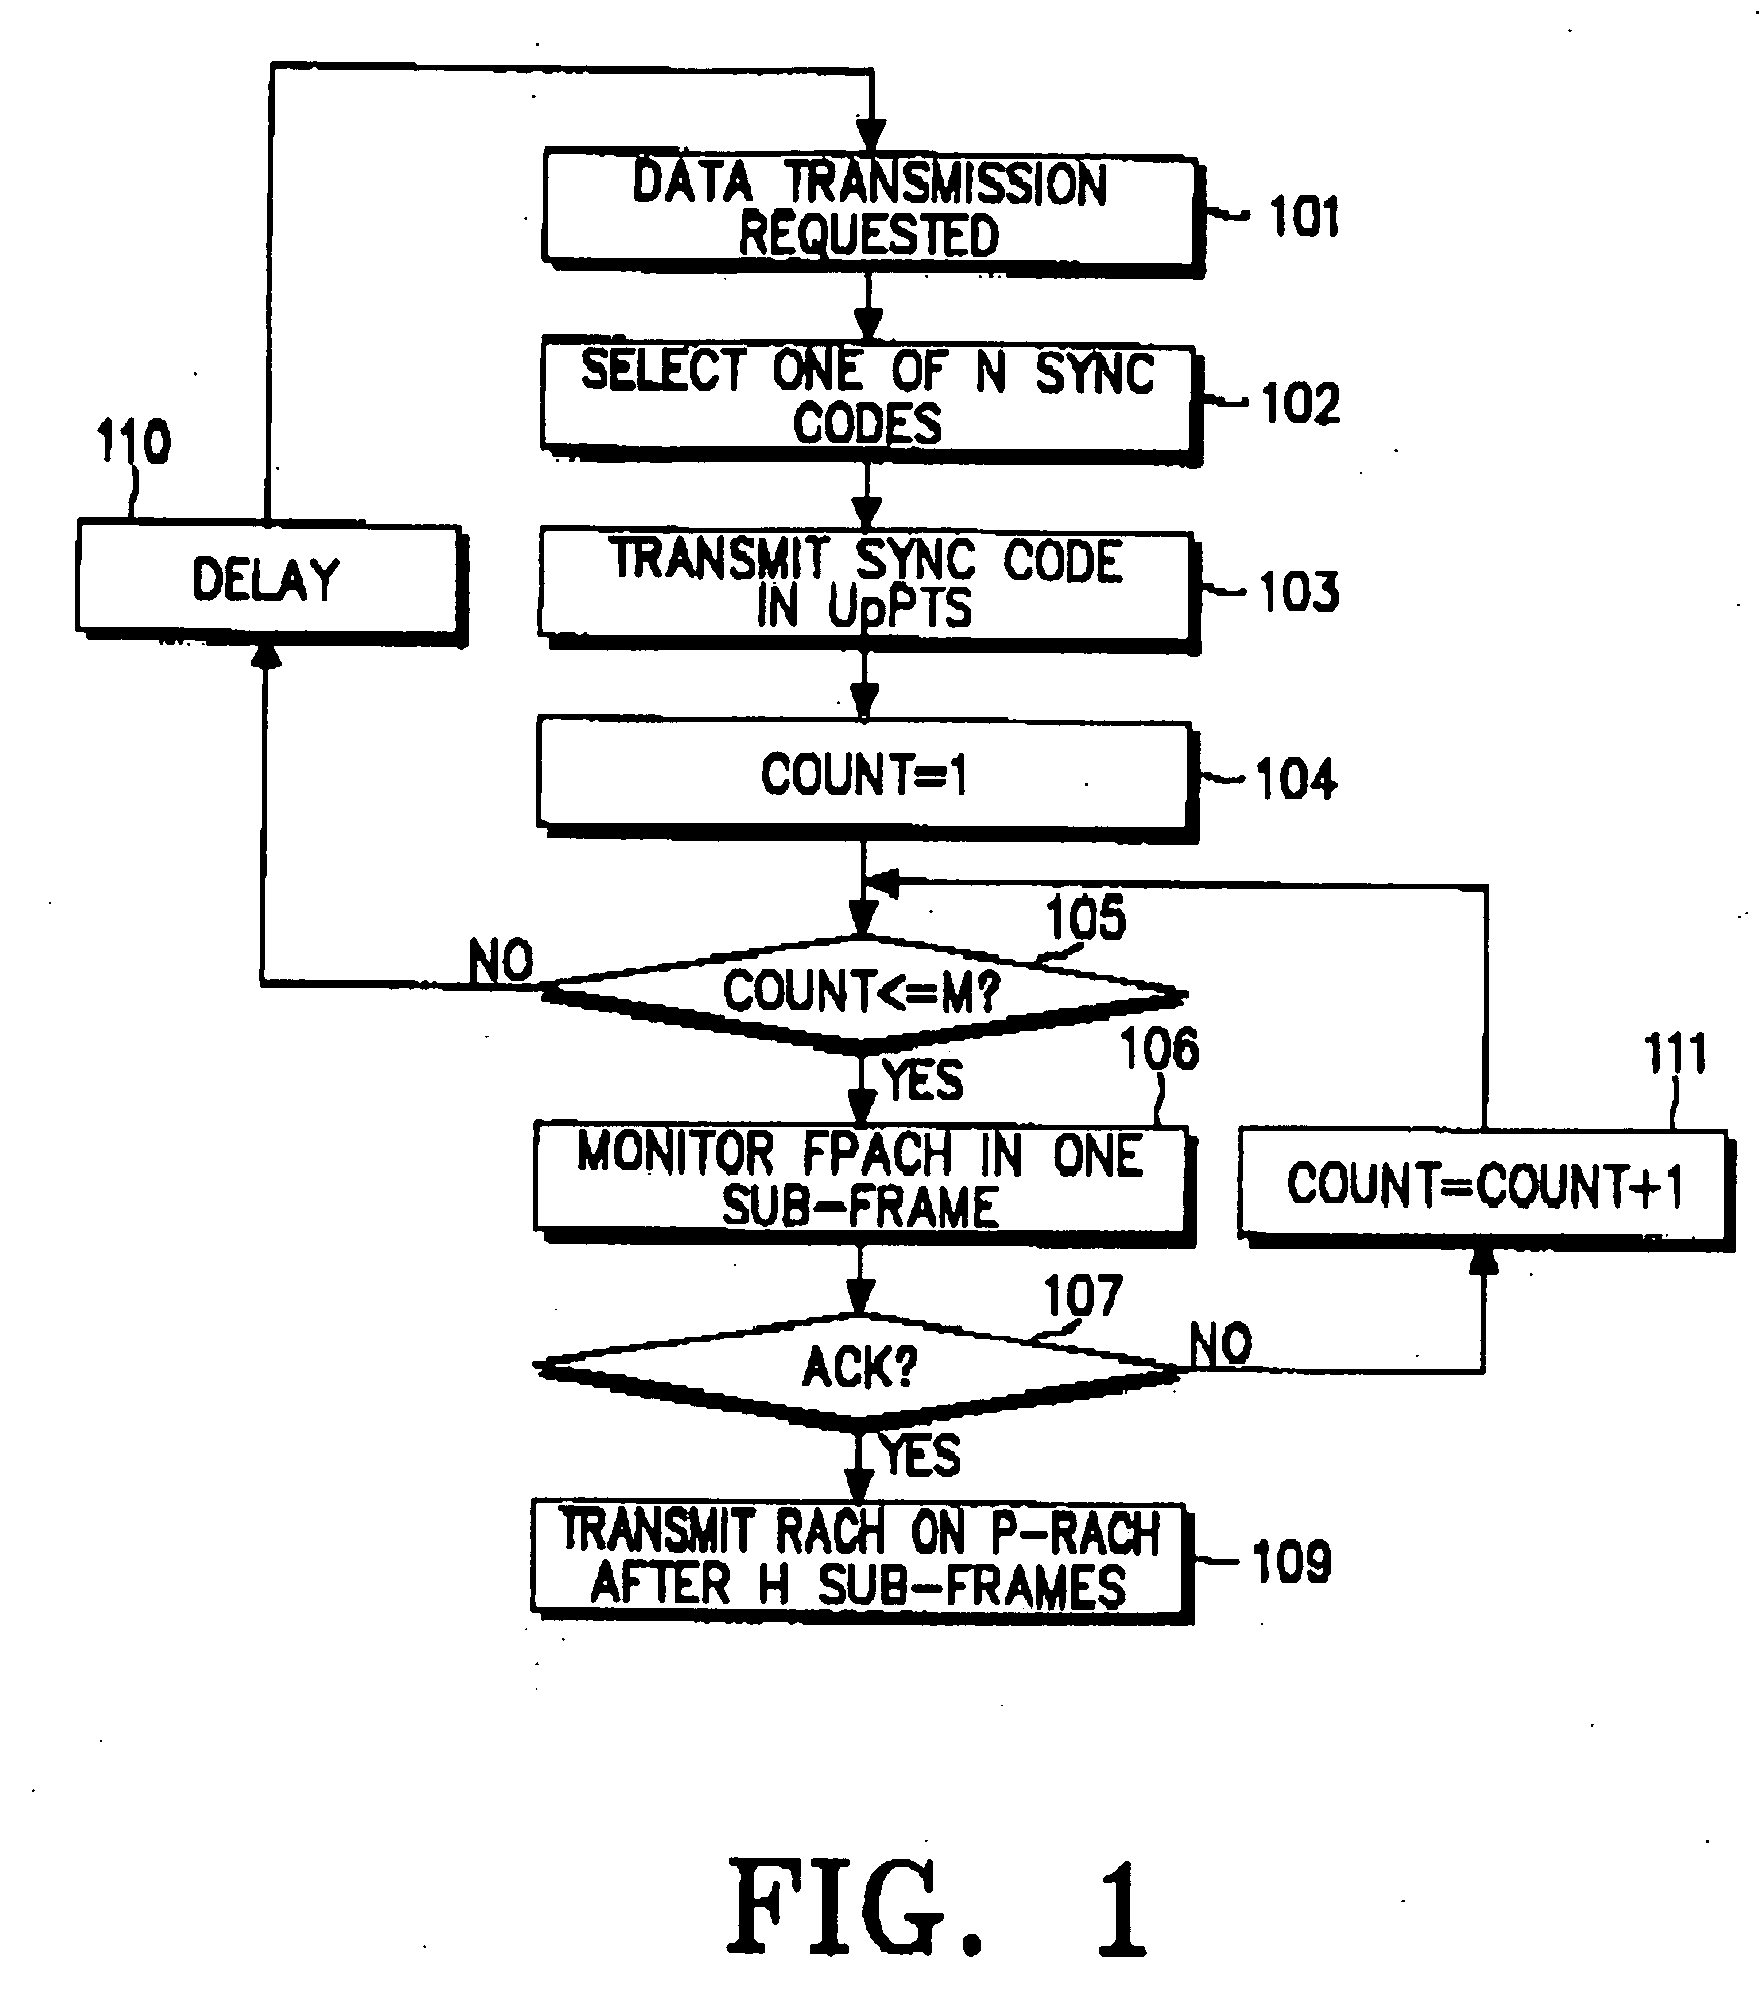 Method of assigning an uplink random access channel in a CDMA mobile communication system